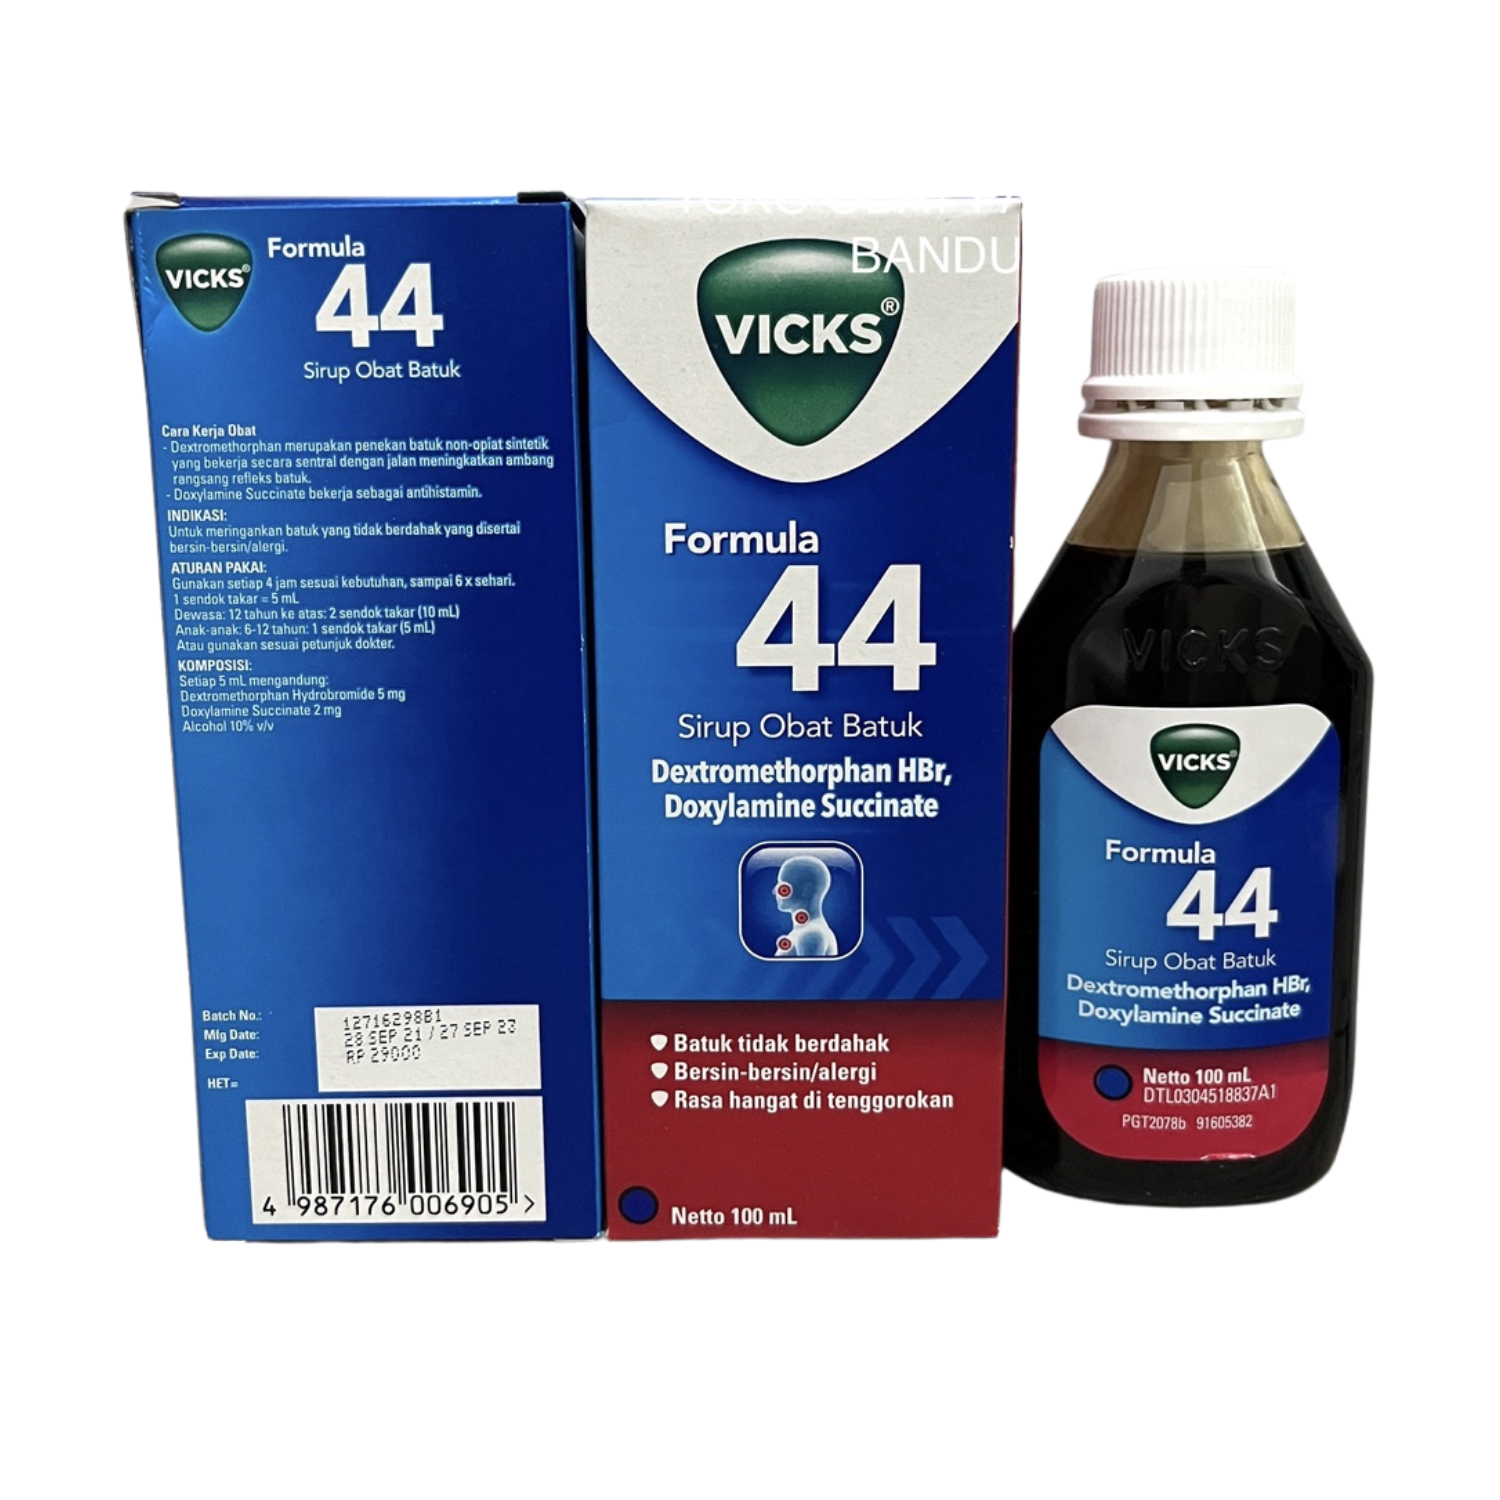 Vicks Formula 44 Cough Syrup Fast Relief Chest Congestion Phlegm And Sore